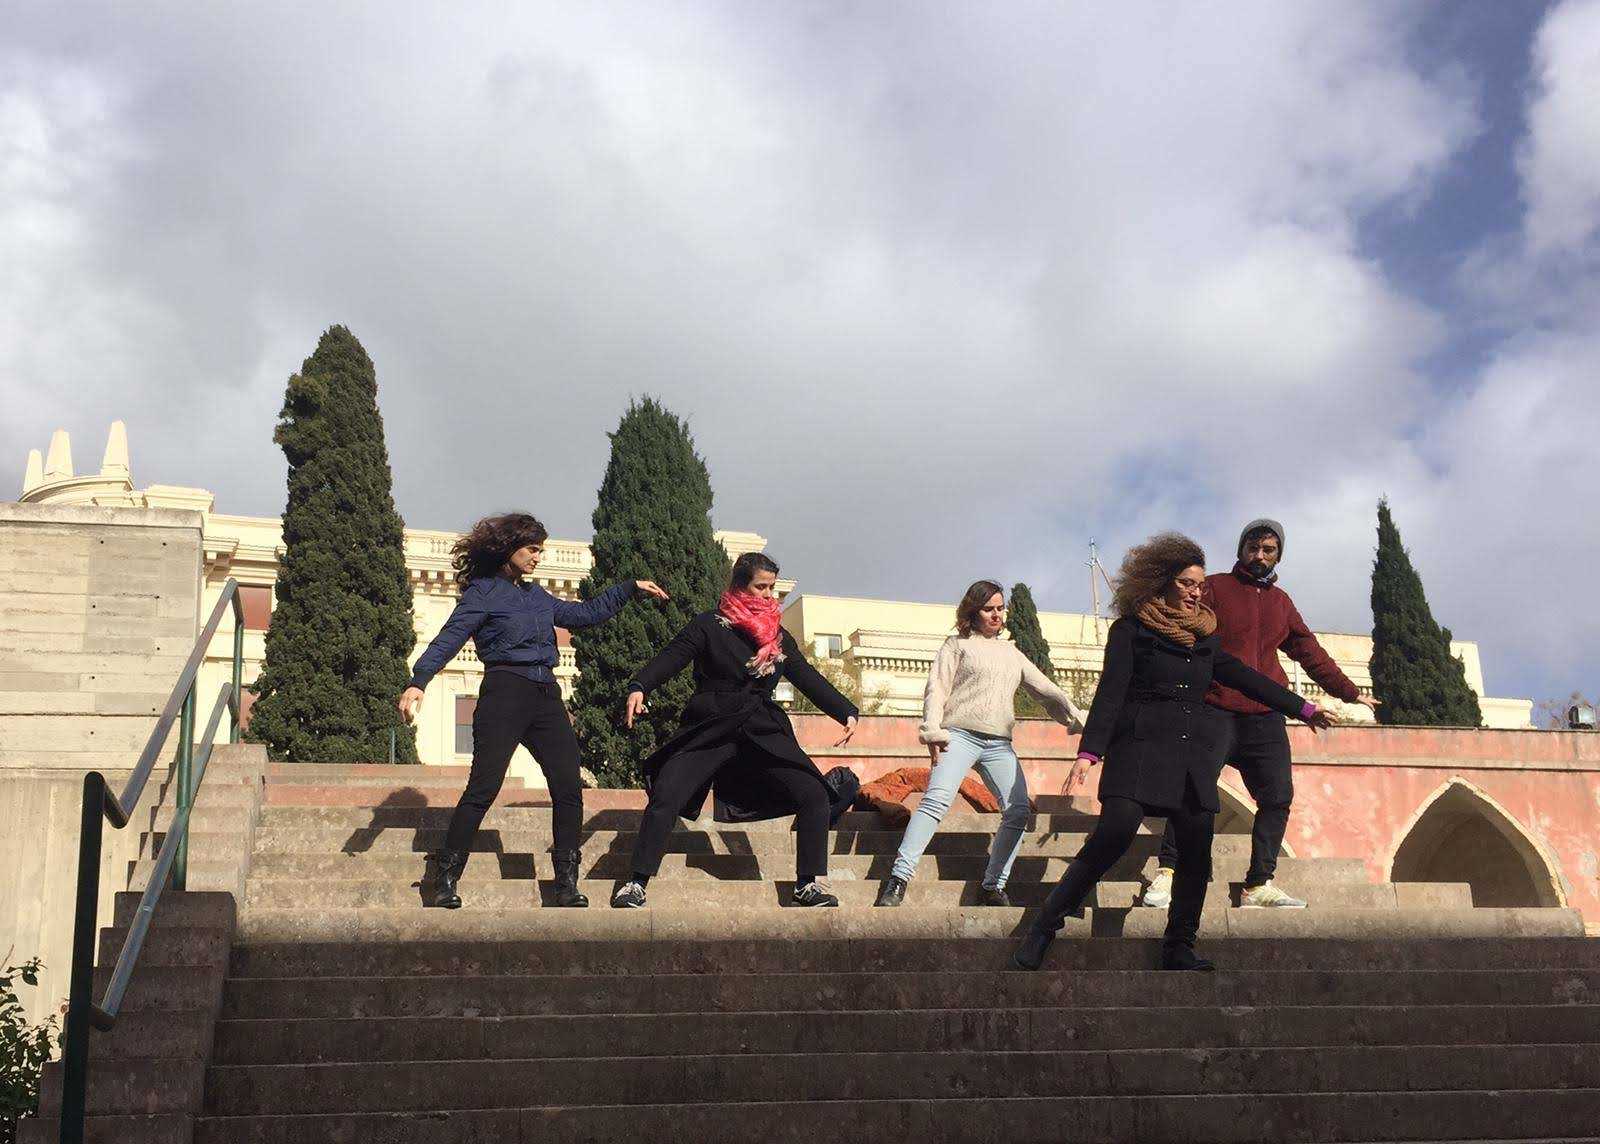 Choreography performed as part of Livio Casanova's student led session for COOP study group Curating Positions. DAI Week 4, Cagliari 2019. In the picture from left to right, Marwa Arsanios, an unknown person whose face is hidden under a scarf, Leire Vergara, Dina Mohamed, Raphael Daibert.